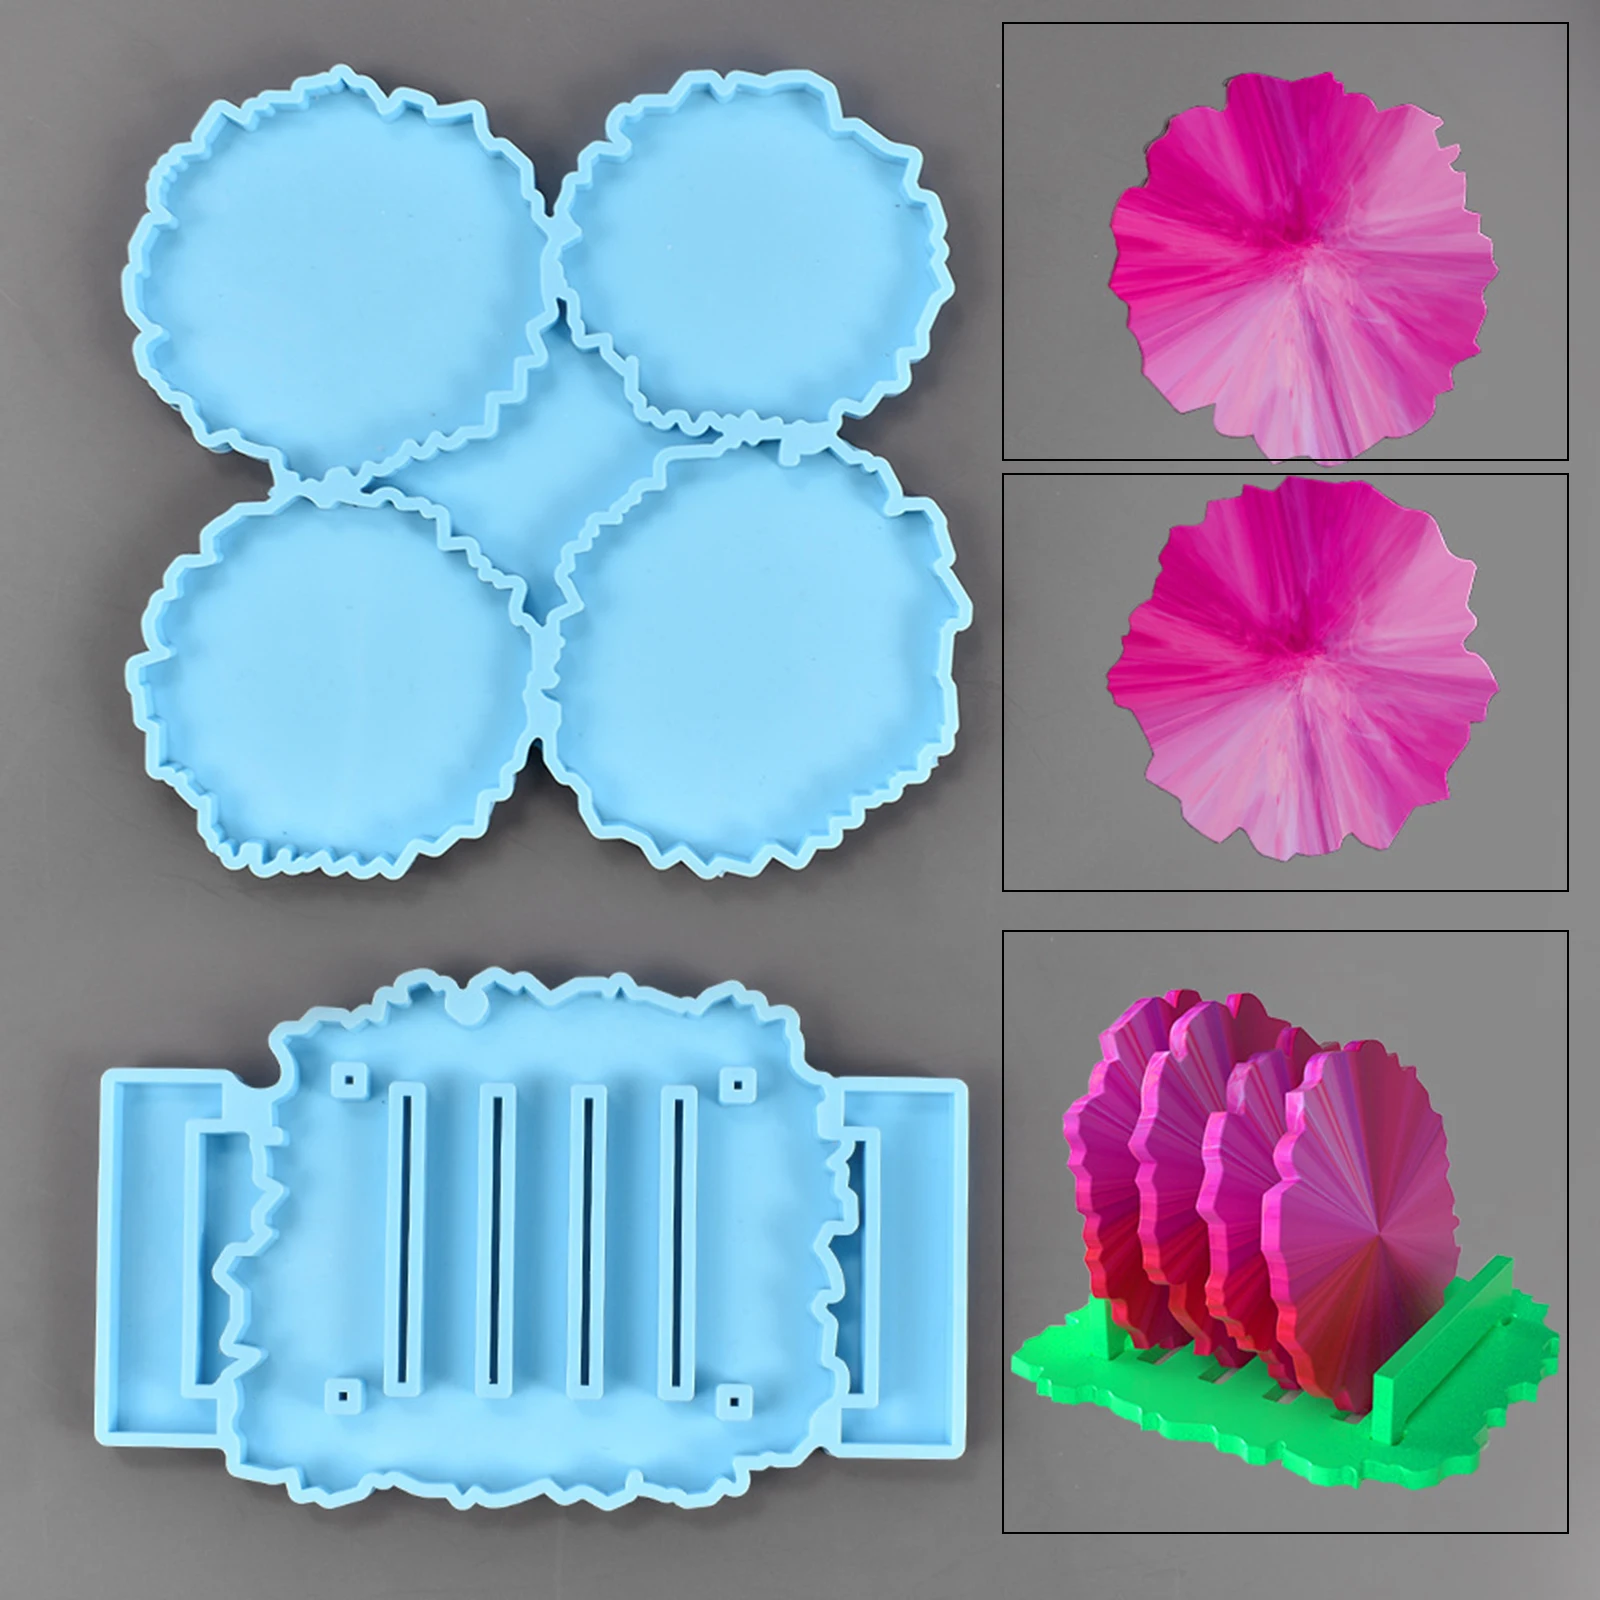 Silicone Irregular Coaster Mold Cup Trays Epoxy Resin Casting Clay Making Moulds Crafts With Holders Molds Home Decor